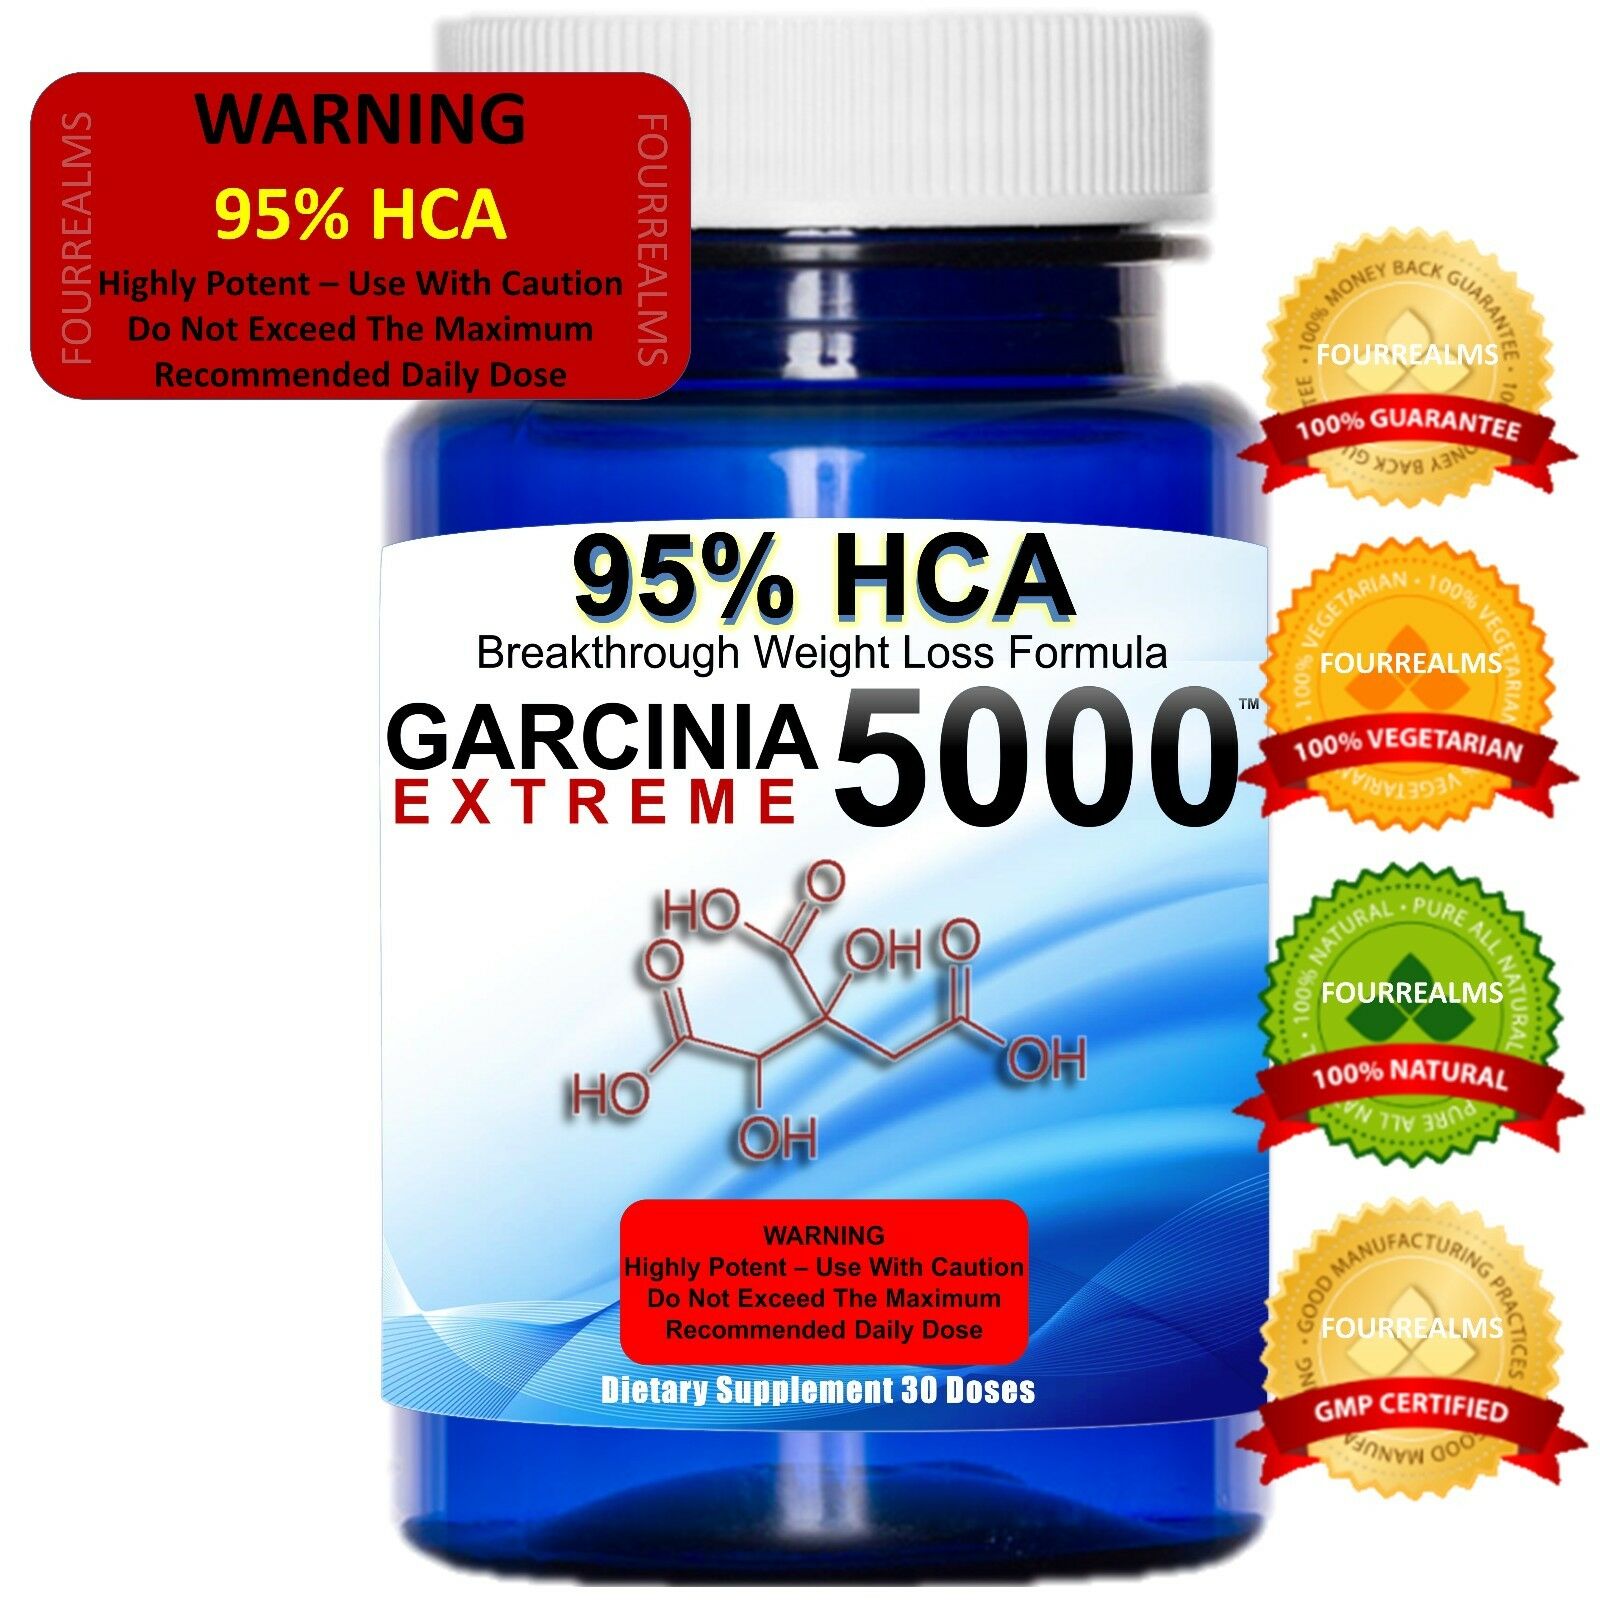 100% Pure Garcinia Cambogia Extract Not 80% Hca - Contains 95% Hca Weight Loss